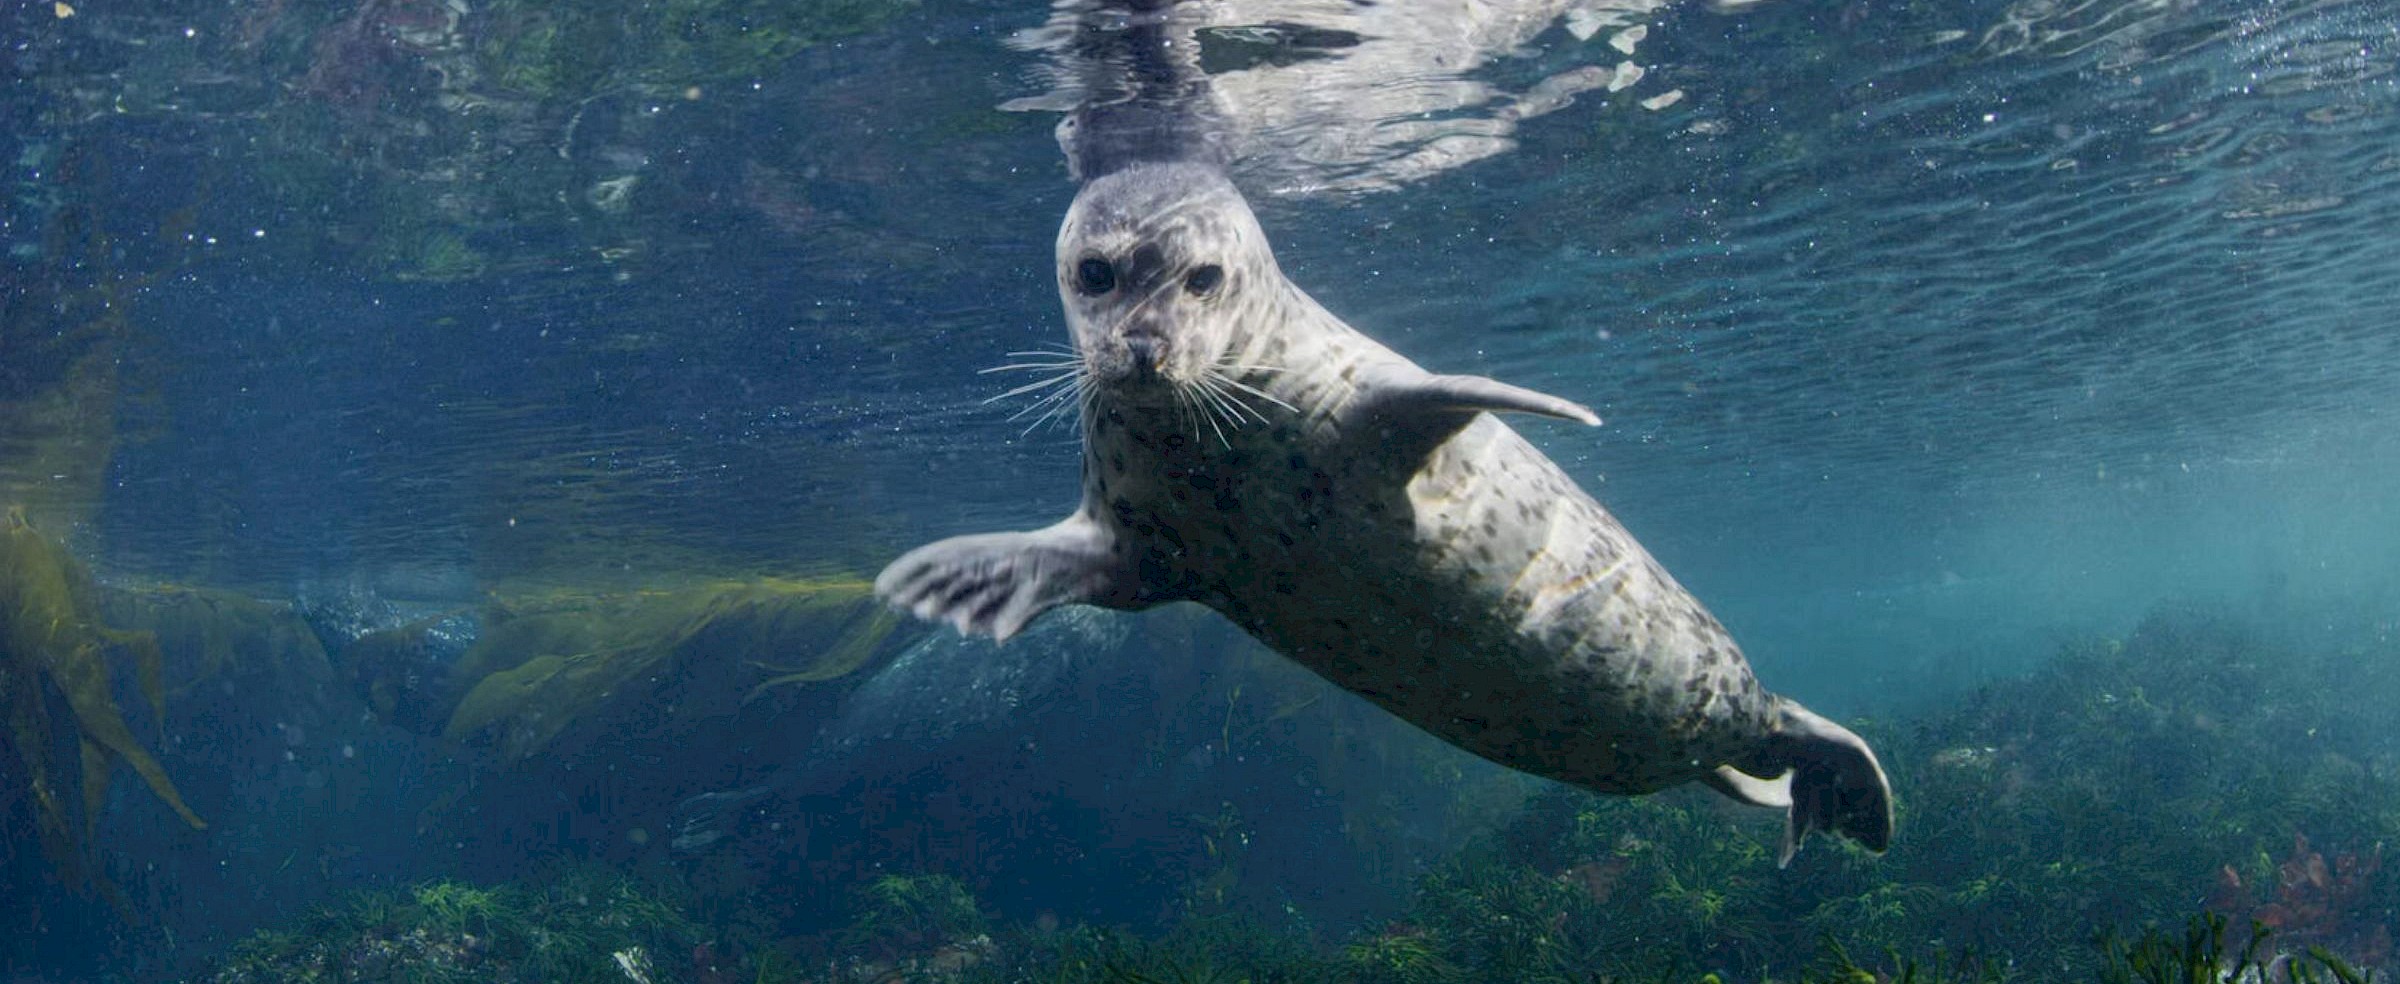 Watching a seal while diving.